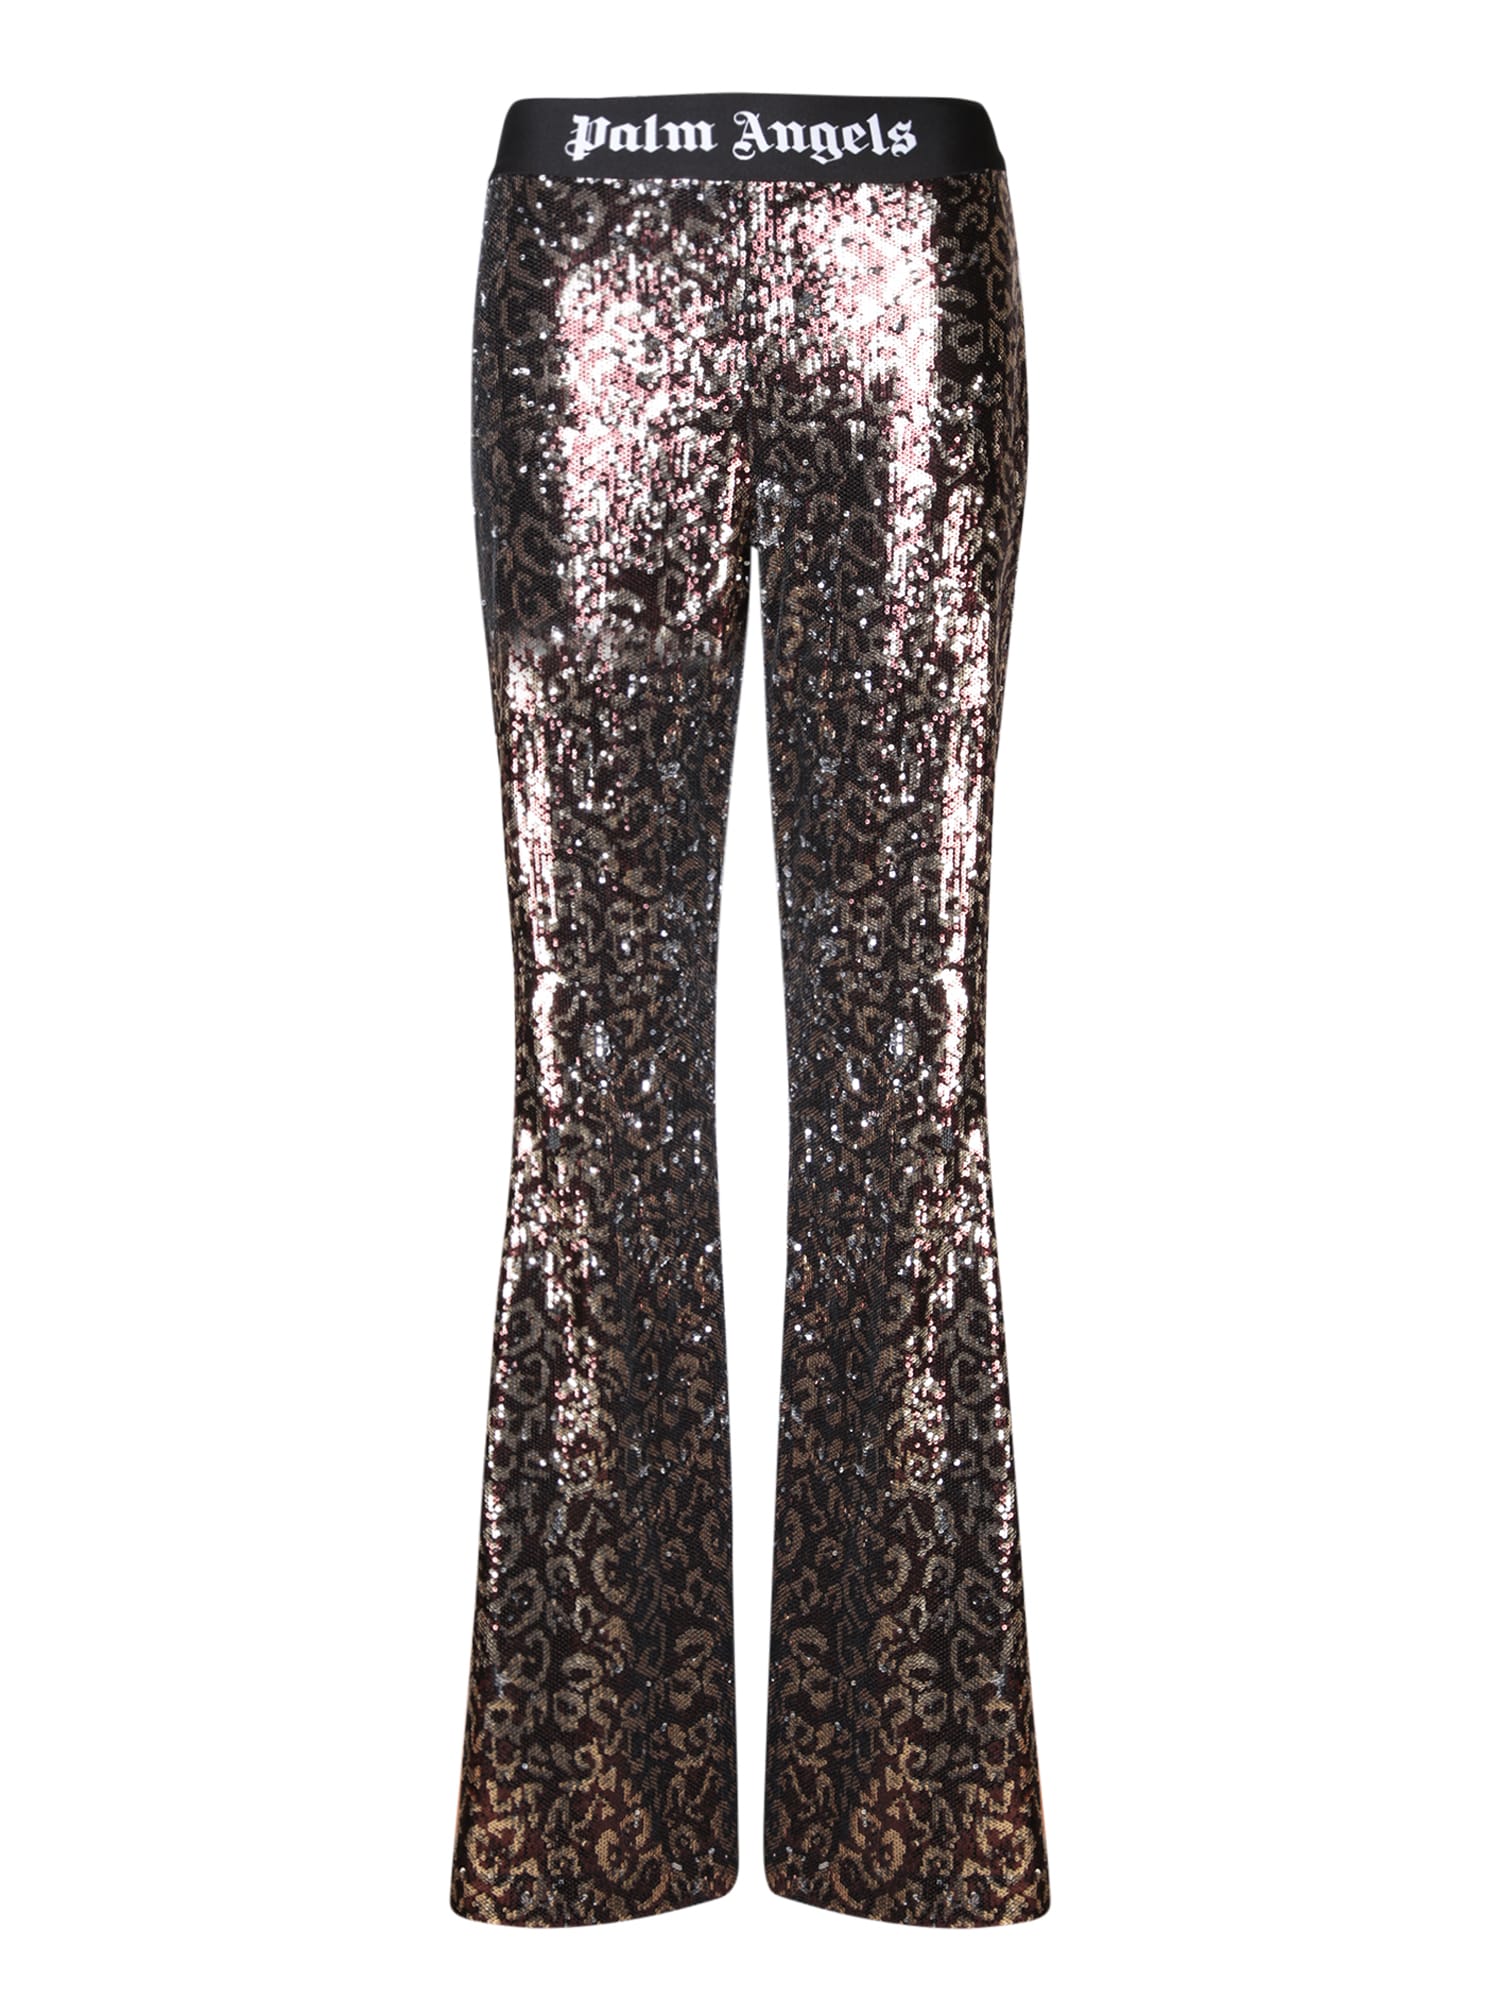 PALM ANGELS SEQUINS FLARED TROUSERS